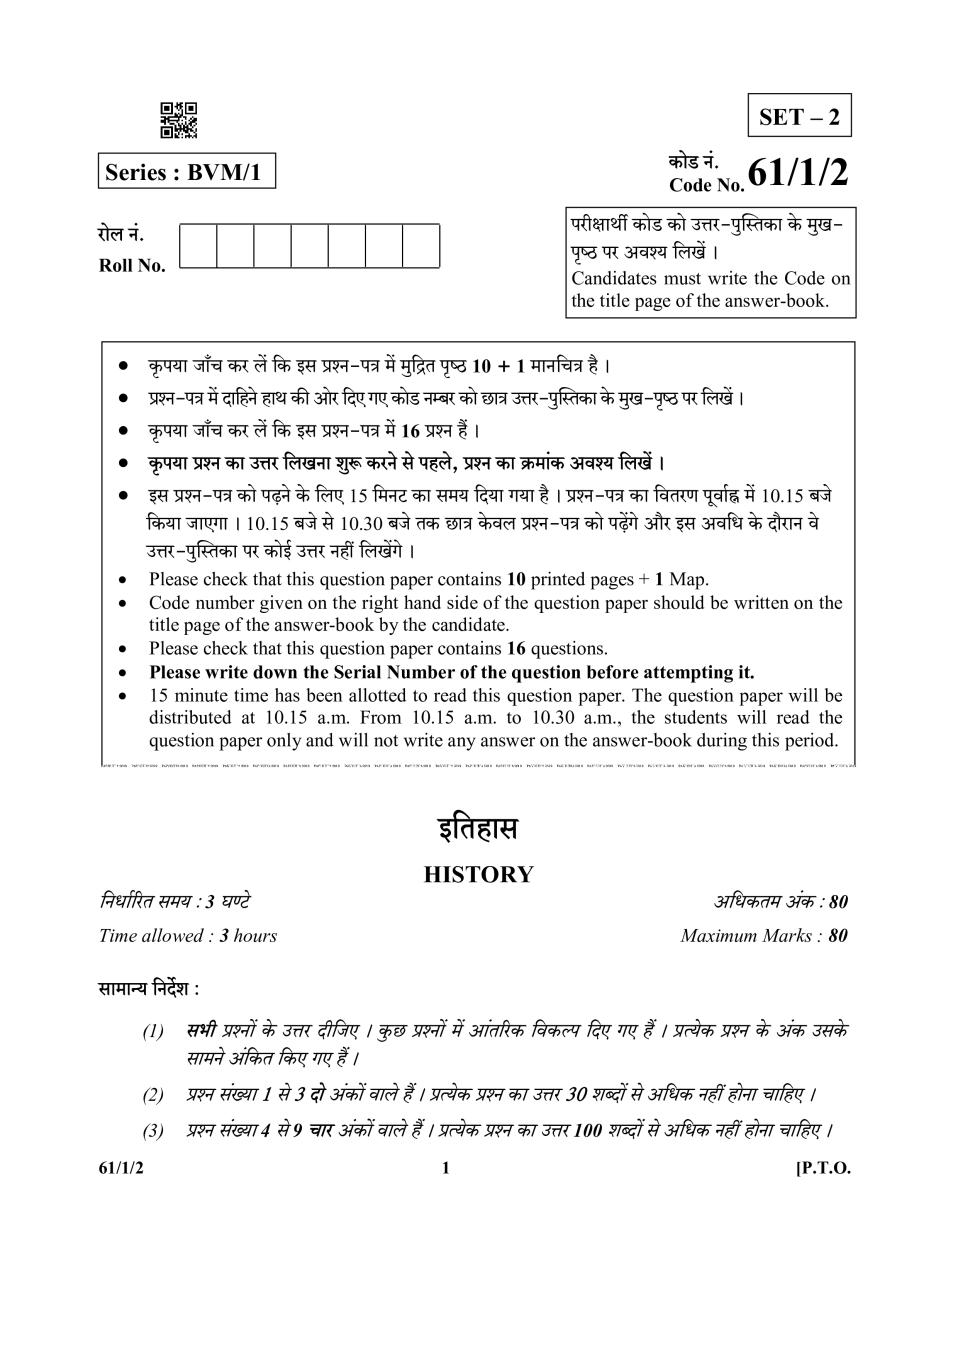 CBSE Class 12 History Question Paper 2019 Set 1 - Page 1